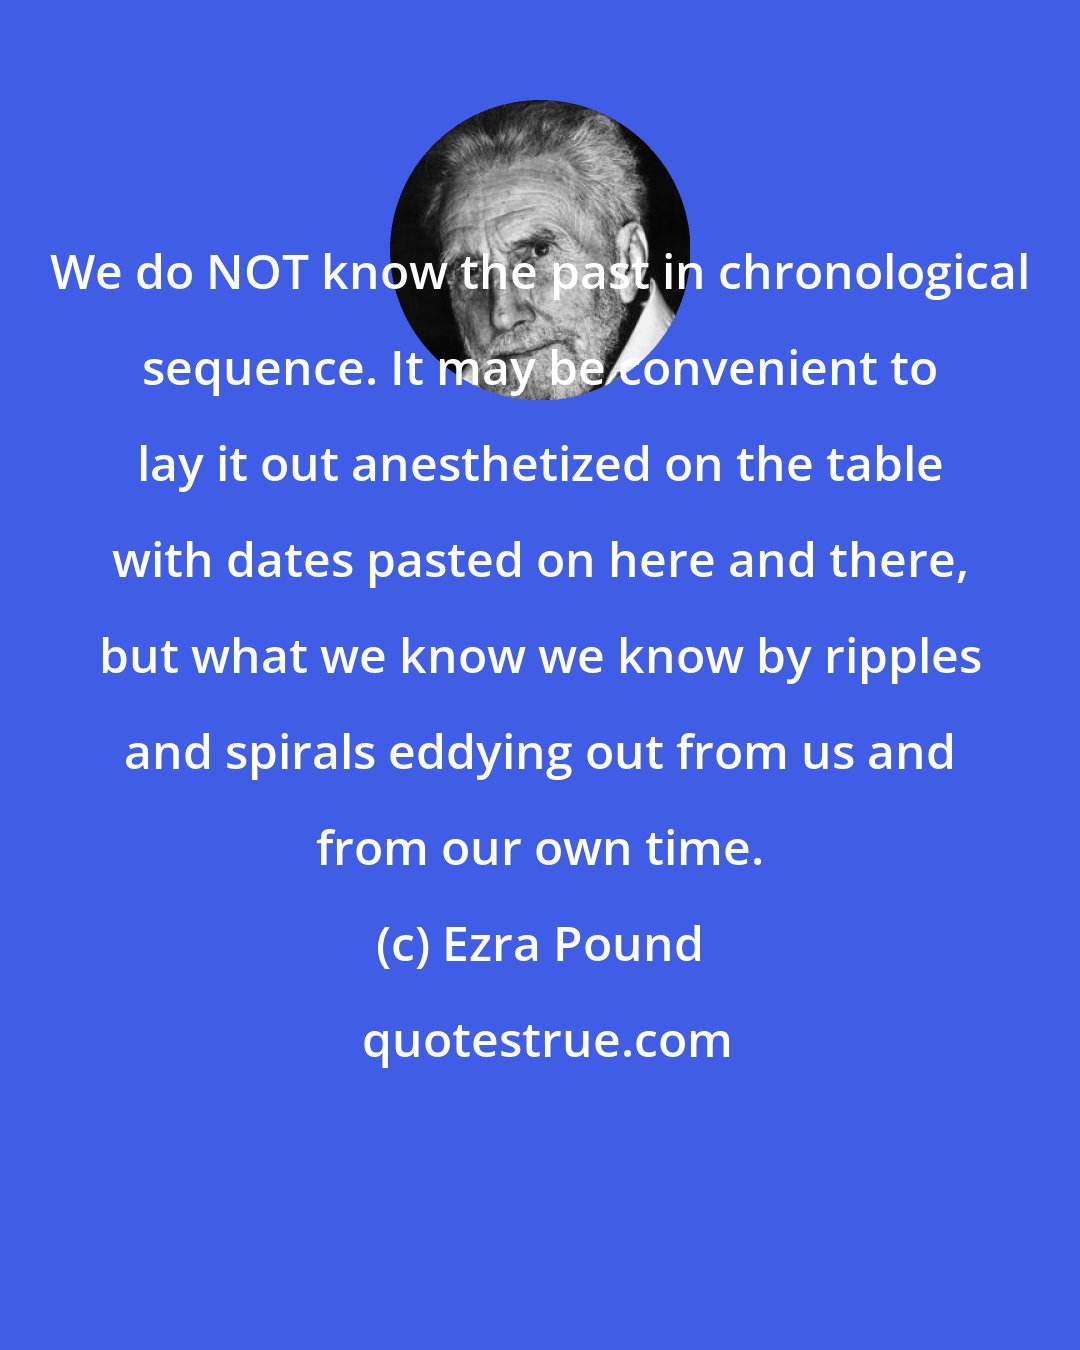 Ezra Pound: We do NOT know the past in chronological sequence. It may be convenient to lay it out anesthetized on the table with dates pasted on here and there, but what we know we know by ripples and spirals eddying out from us and from our own time.